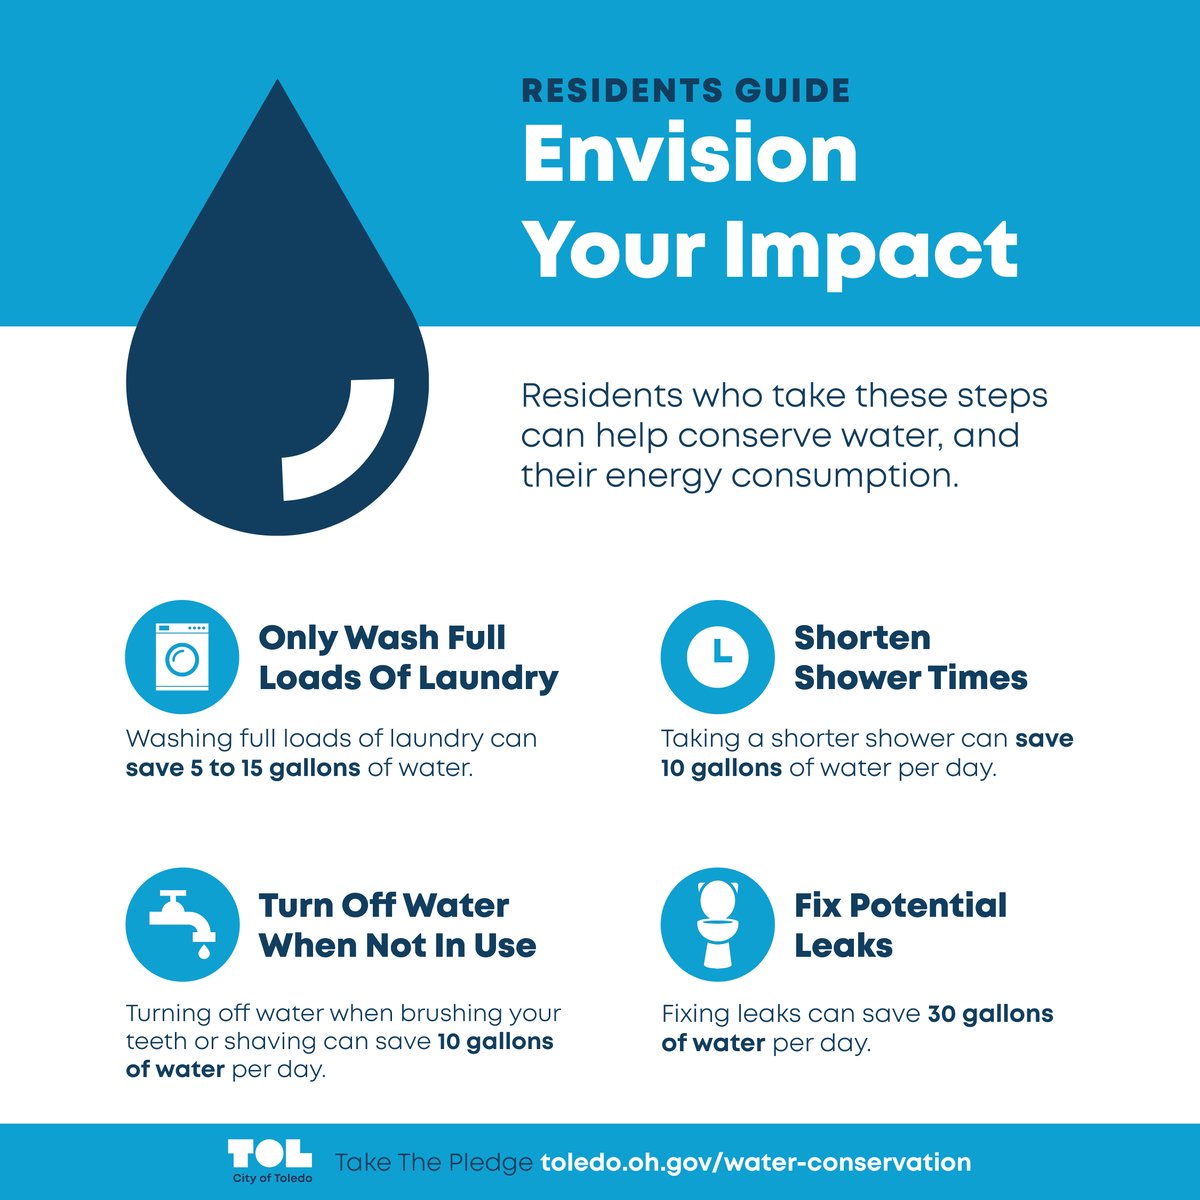 Take the Pledge for #WaterConservationMonth! 💦 We're inviting you to join us in making a difference! Follow the tips below and take the pledge to practice water conservation at home and at work. take the pledge at ow.ly/9eWj50R9evm